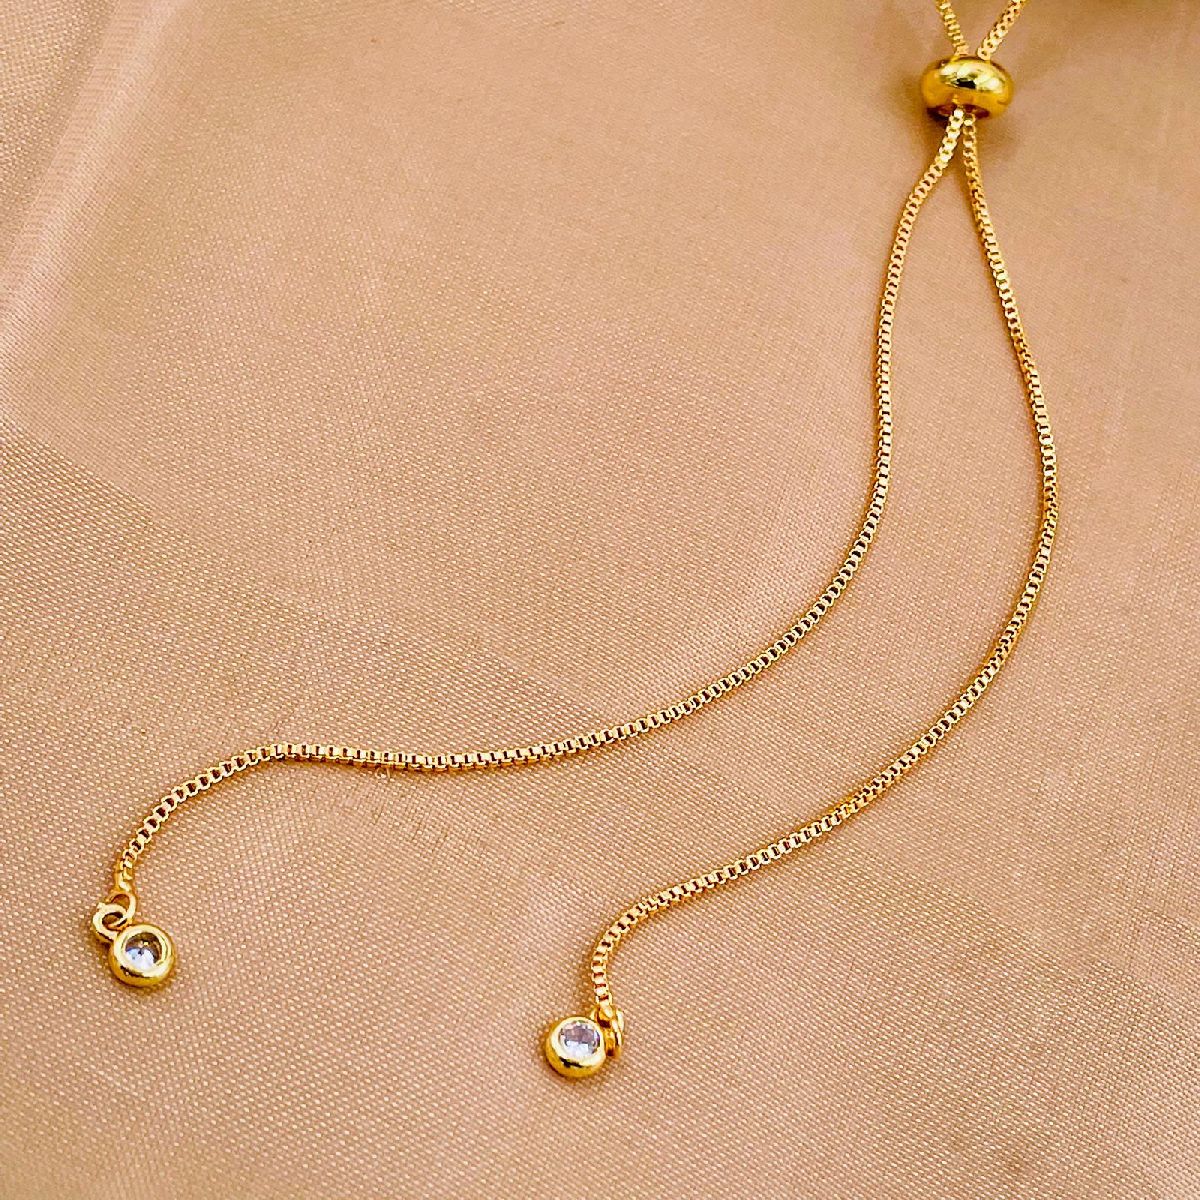 Dainty Solitaire Cubic Zirconia Gold Adjustable Necklace Chain Women